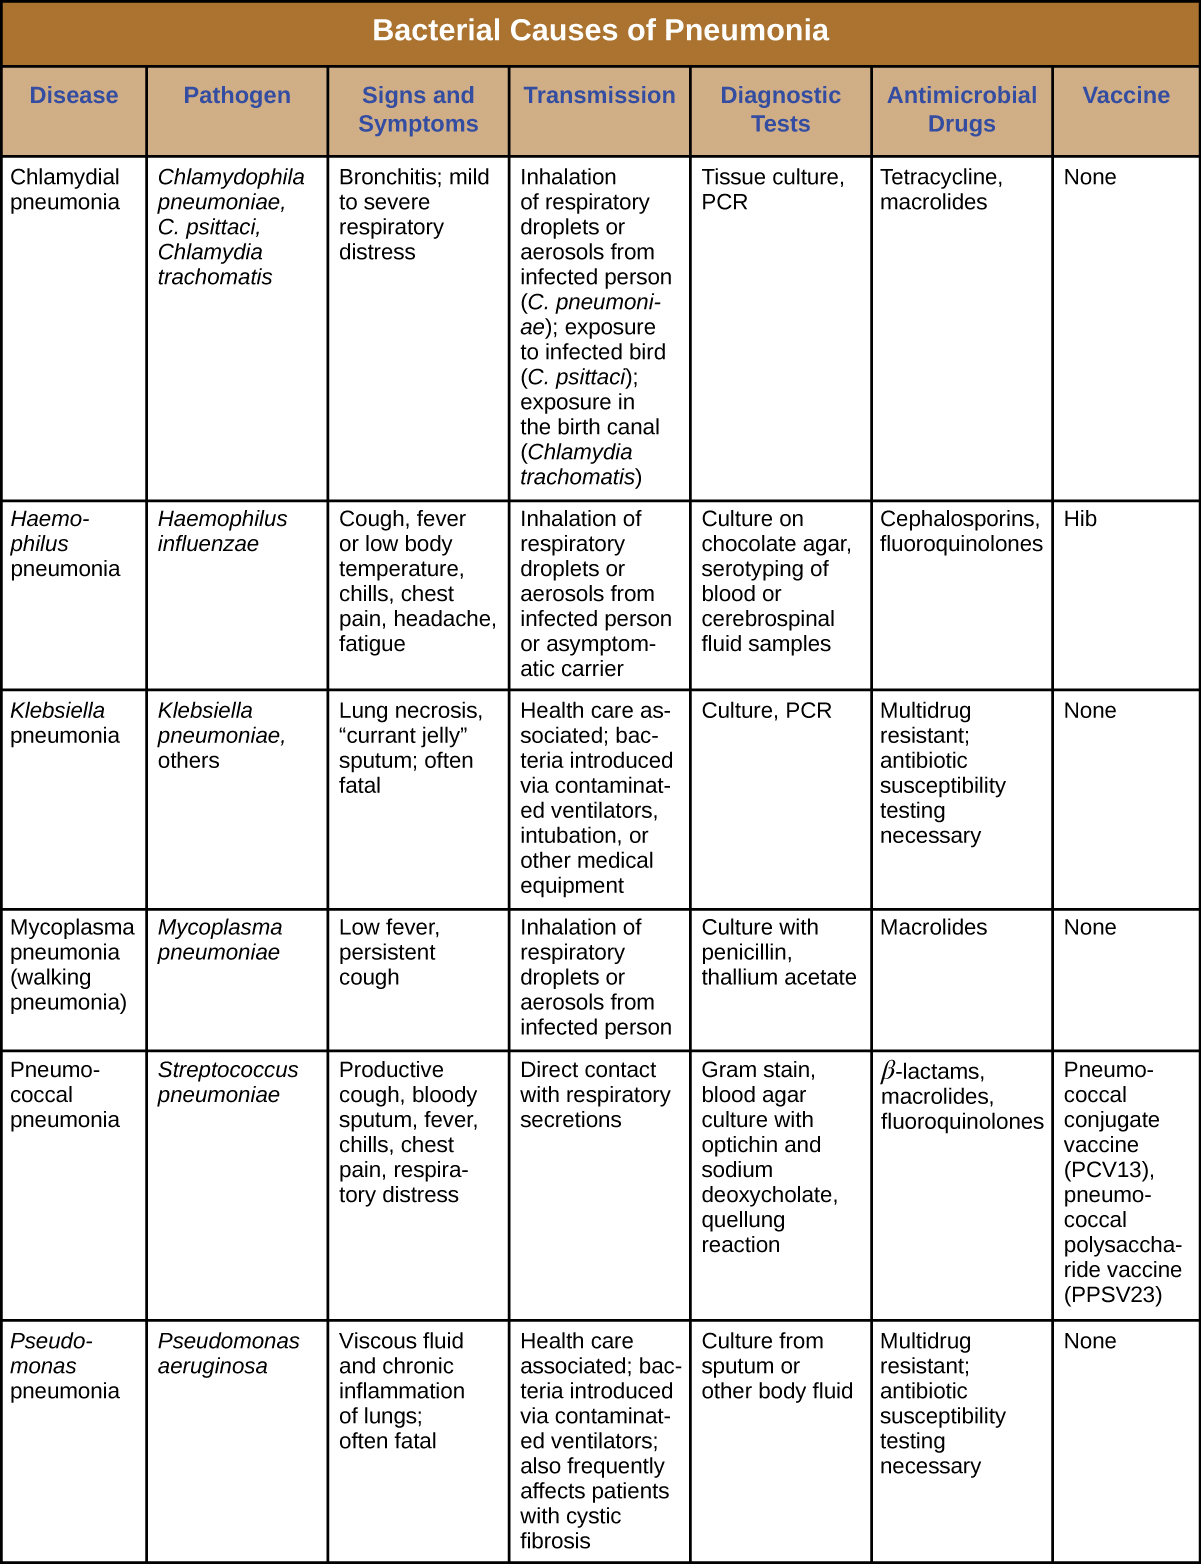 Table titled: Bacterial Causes of Pneumonia. Columns: Disease, Pathogen, Signs and Symptoms, Transmission, Diagnostic Tests, Antimicrobial Drugs, Vaccine. Chlamydial pneumonia; Chlamydophila pneumoniae, C. psittaci, Chlamydia trachomatis; Bronchitis; mild to severe respiratory distress; Inhalation of respiratory droplets or aerosols from infected person (C. pneumoniae); exposure to infected bird (C. psittaci); exposure in the birth canal (Chlamydia trachomatis); Tissue culture, PCR; Tetracycline, macrolides; None. Haemophilus pneumonia; Haemophilus influenza; Cough, fever or low body temperature, chills, chest pain, headache, fatigue; Inhalation of respiratory droplets or aerosols from infected person or asymptomatic carrier; Culture on chocolate agar, serotyping of blood or cerebrospinal fluid samples; Cephalosporins, fluoroquinolones; Hib. Klebsiella pneumonia; Klebsiella pneumoniae, others; Lung necrosis, “currant jelly” sputum; often fatal; Health care associated; bacteria introduced via contaminated ventilators, intubation, or other medical equipment; Multidrug resistant; antibiotic susceptibility testing necessary; None. Mycoplasma pneumonia (walking pneumonia); Mycoplasma pneumoniae; Low fever, persistent cough; Inhalation of respiratory droplets or aerosols from infected person Culture with penicillin, thallium acetate; Macrolides; None. Pneumococcal pneumonia; Streptococcus pneumoniae; Productive cough, bloody sputum, fever, chills, chest pain, respiratory distress; Direct contact with respiratory secretions; Gram stain, blood agar culture with optichin and sodium deoxycholate, quellung reaction; β-lactams, macrolides or cephalosporin , fluoroquinolones; Pneumococcal conjugate vaccine (PCV13), pneumococcal polysaccharide vaccine (PPSV23). Pseudomonas pneumonia; Pseudomonas aeruginosa; Viscous fluid and chronic inflammation of lungs; often fatal; Health care associated; bacteria introduced via contaminated ventilators; also frequently affects patients with cystic fibrosis; Culture from sputum or other body fluid; Multidrug resistant; antibiotic susceptibility testing necessary; None.